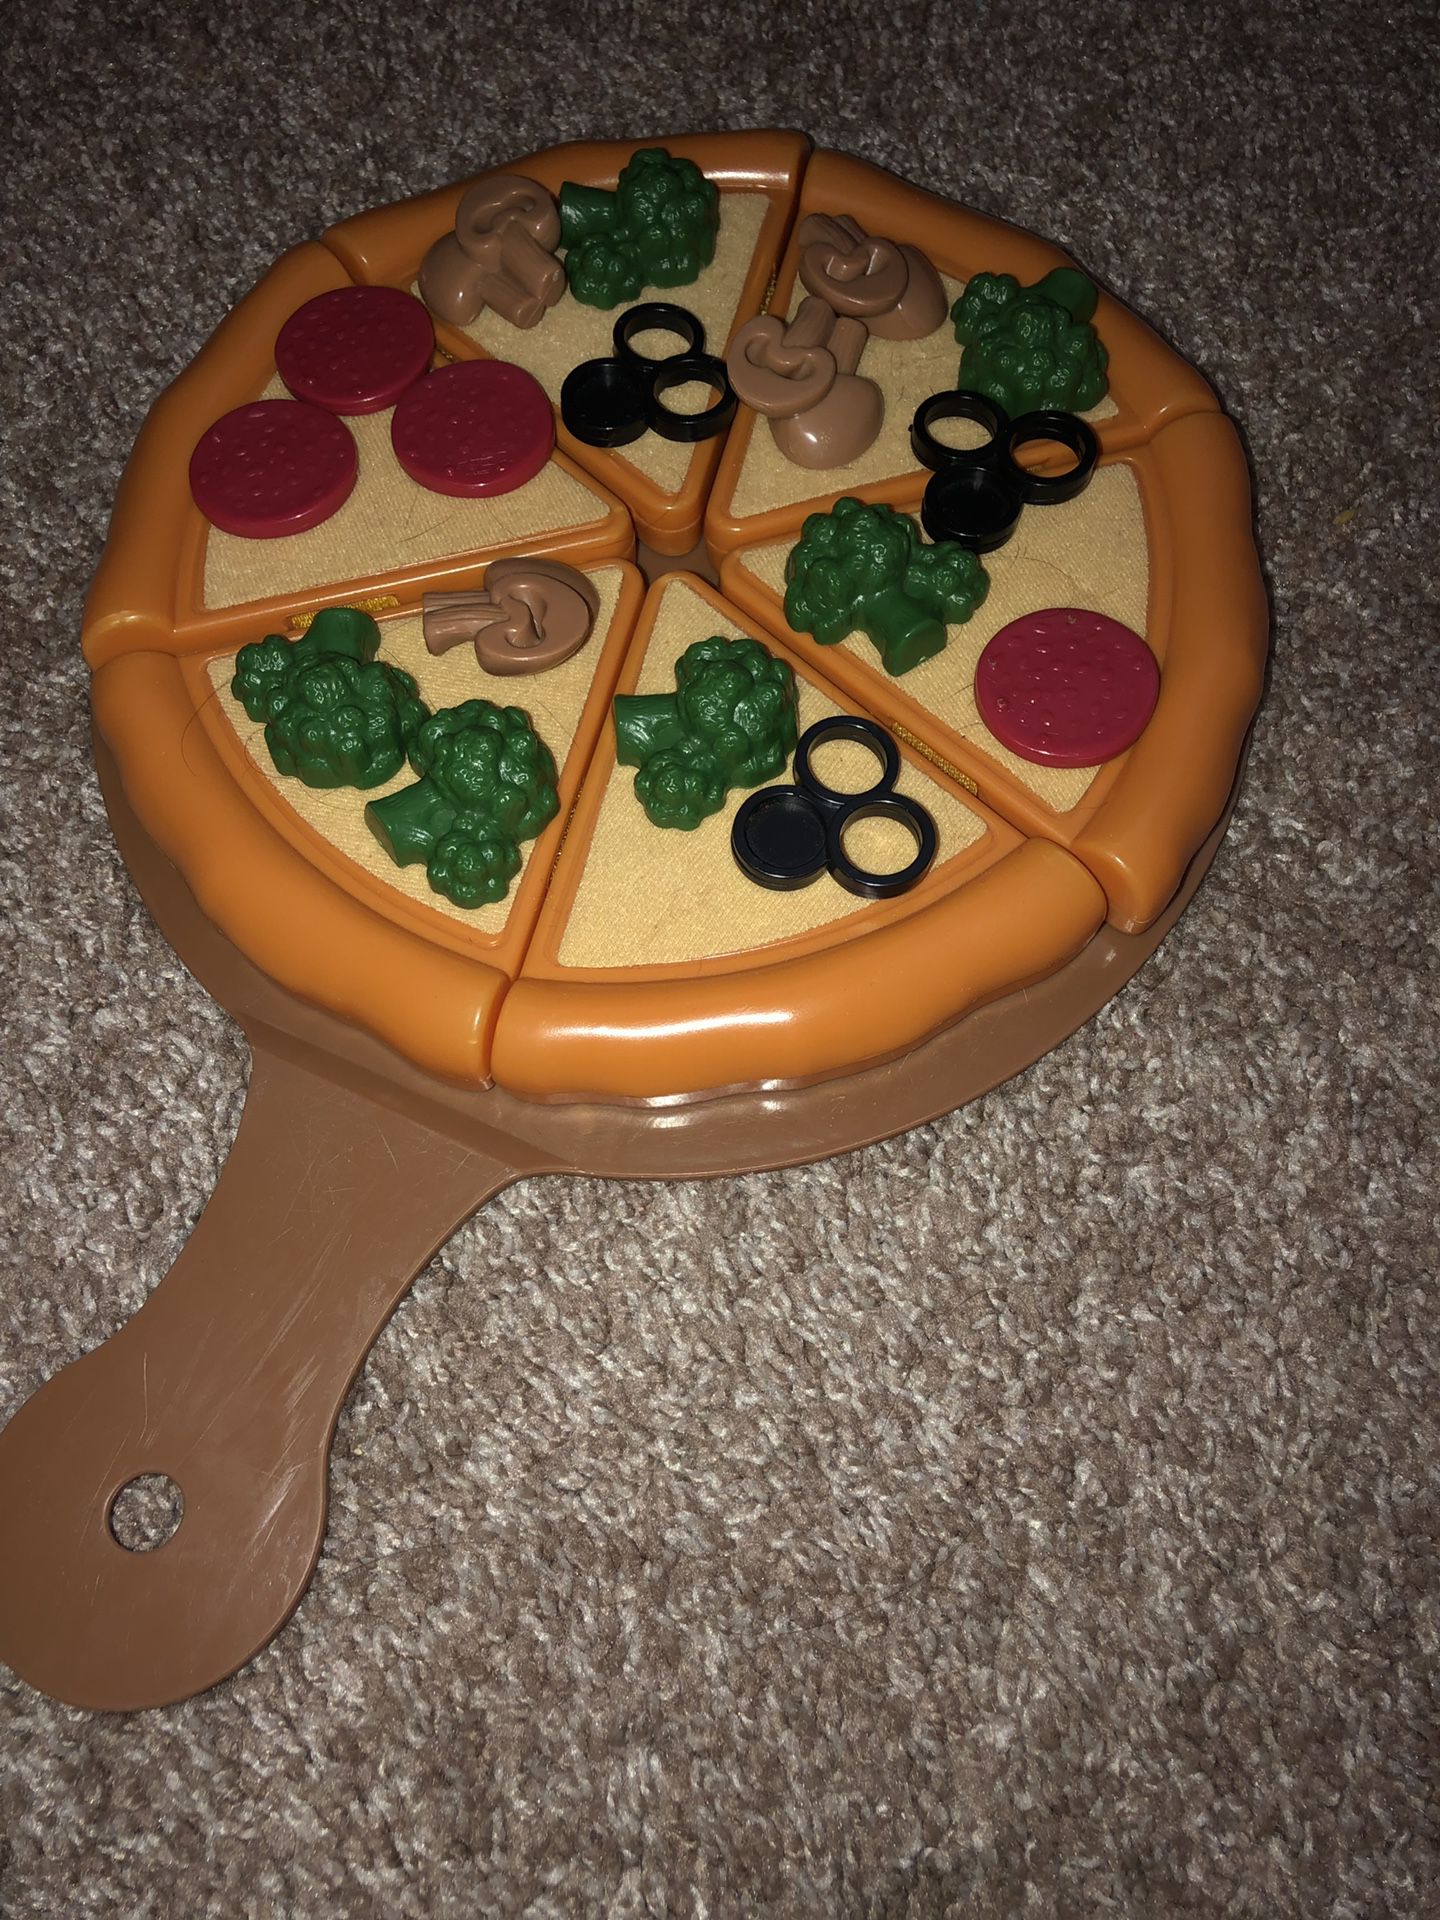 Velcro Pizza Toy Sale in TX - OfferUp